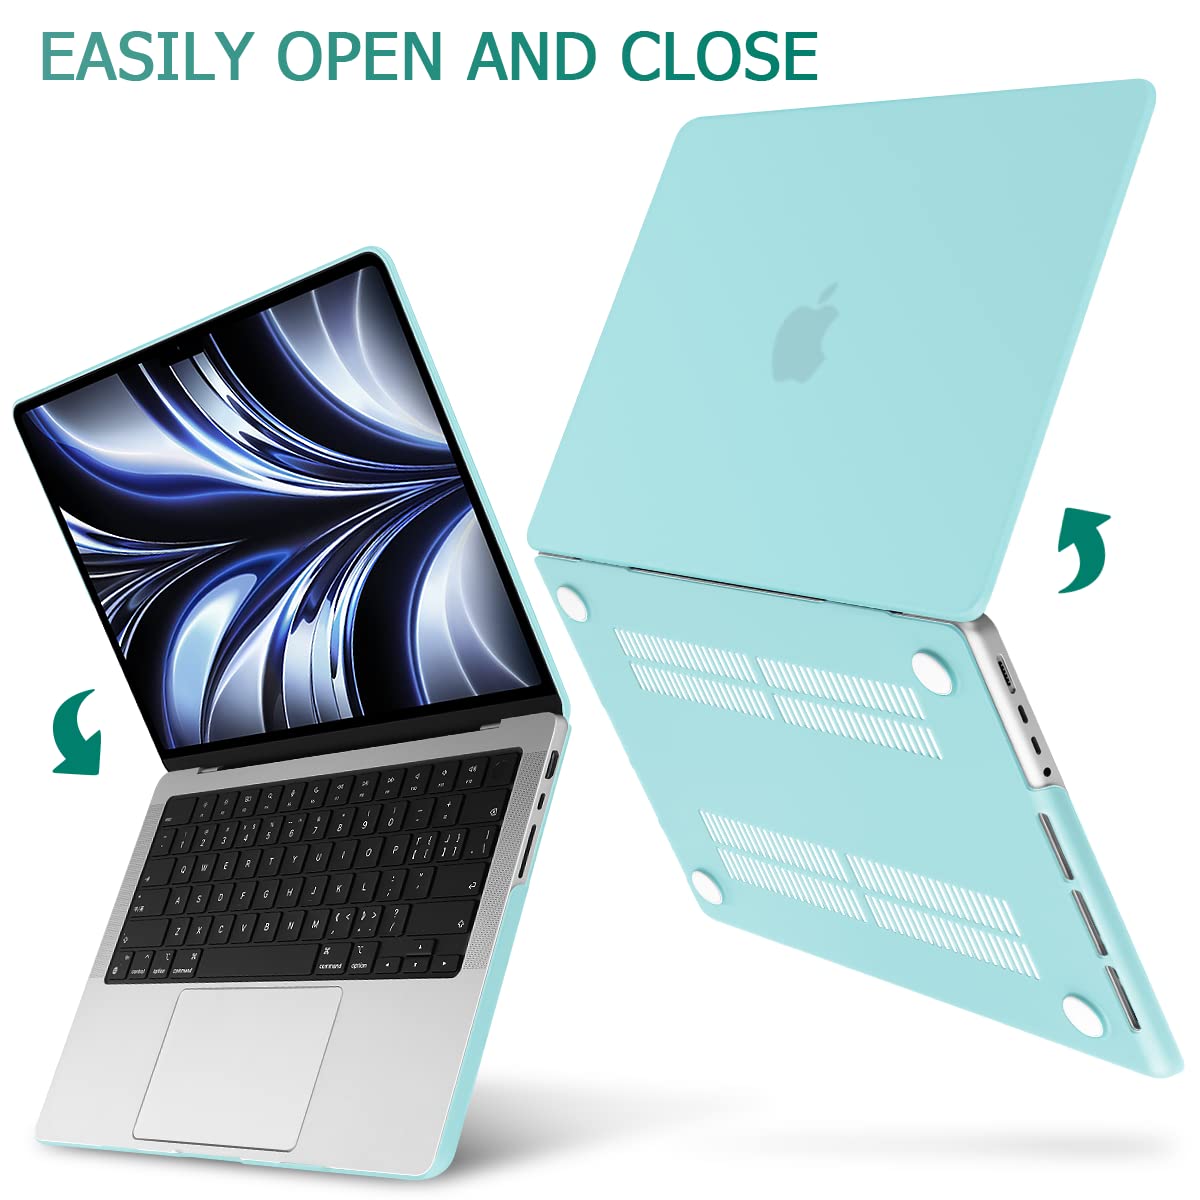 Suitable for  MacBook Pro 14 Max Inch Case 2023 2022 2021 M2 A2779 M1 A2442 Hardshell Case Keyboard Cover Turquoise